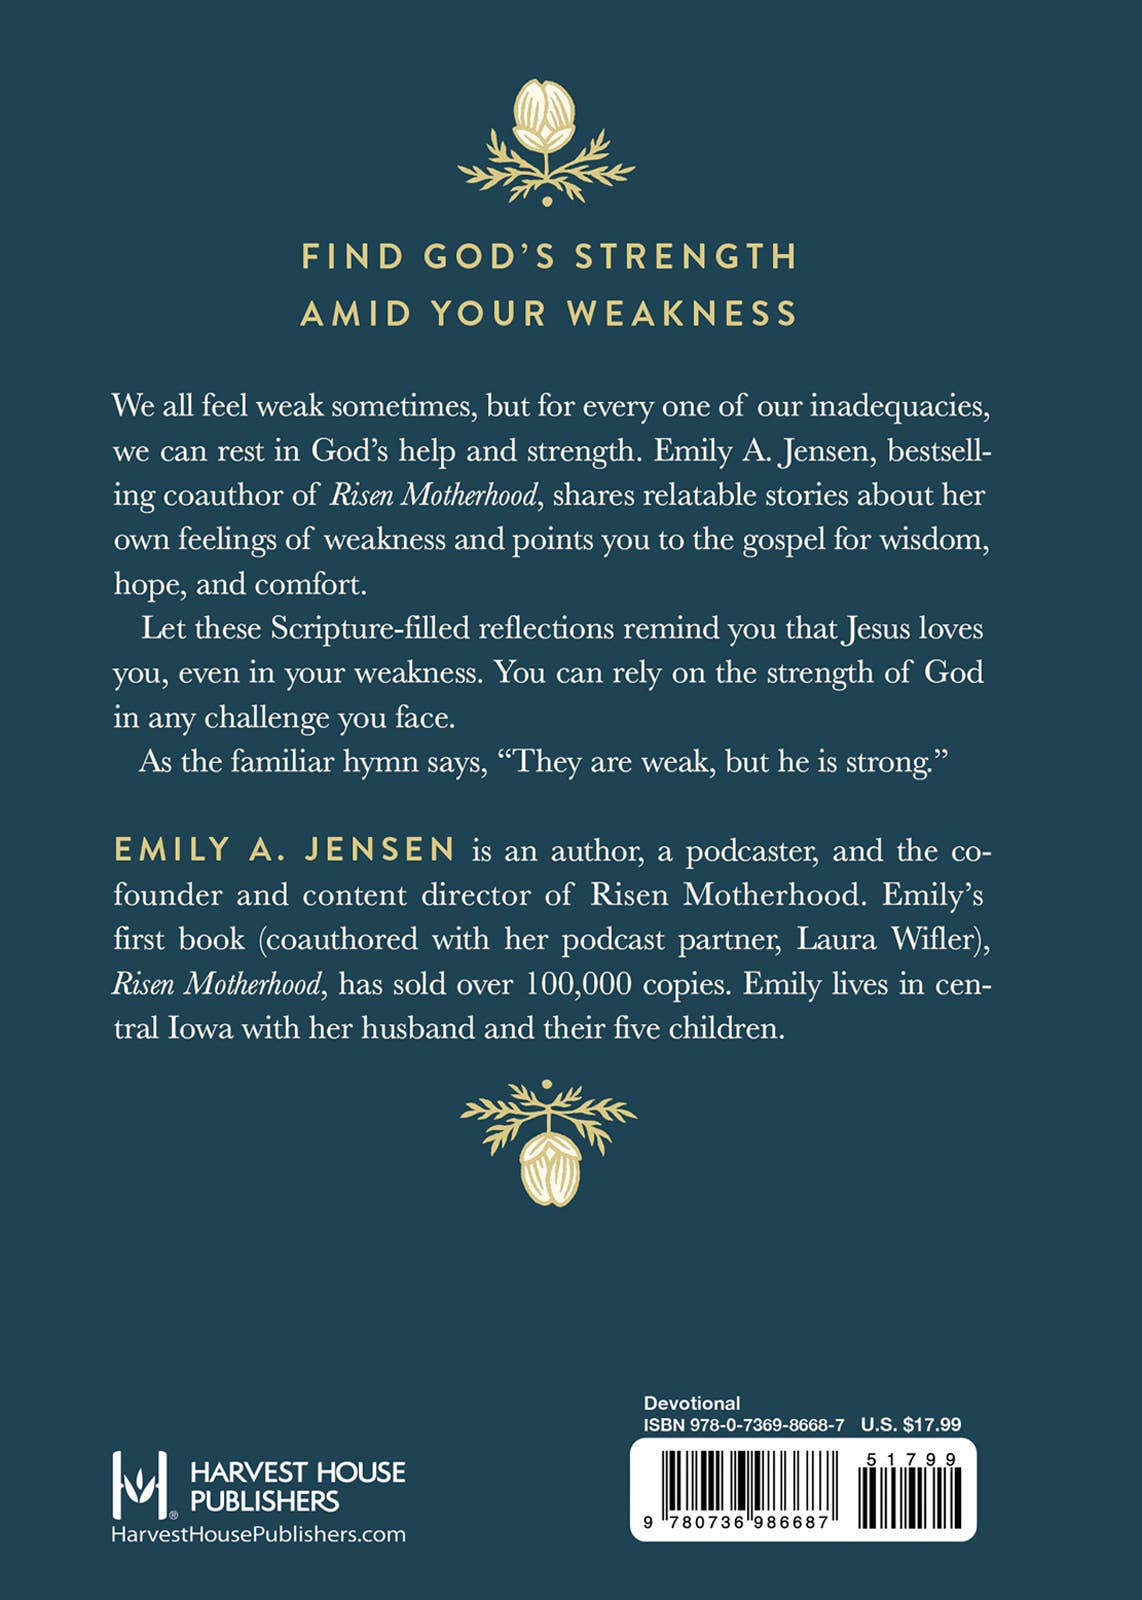 He is Strong - Devotional